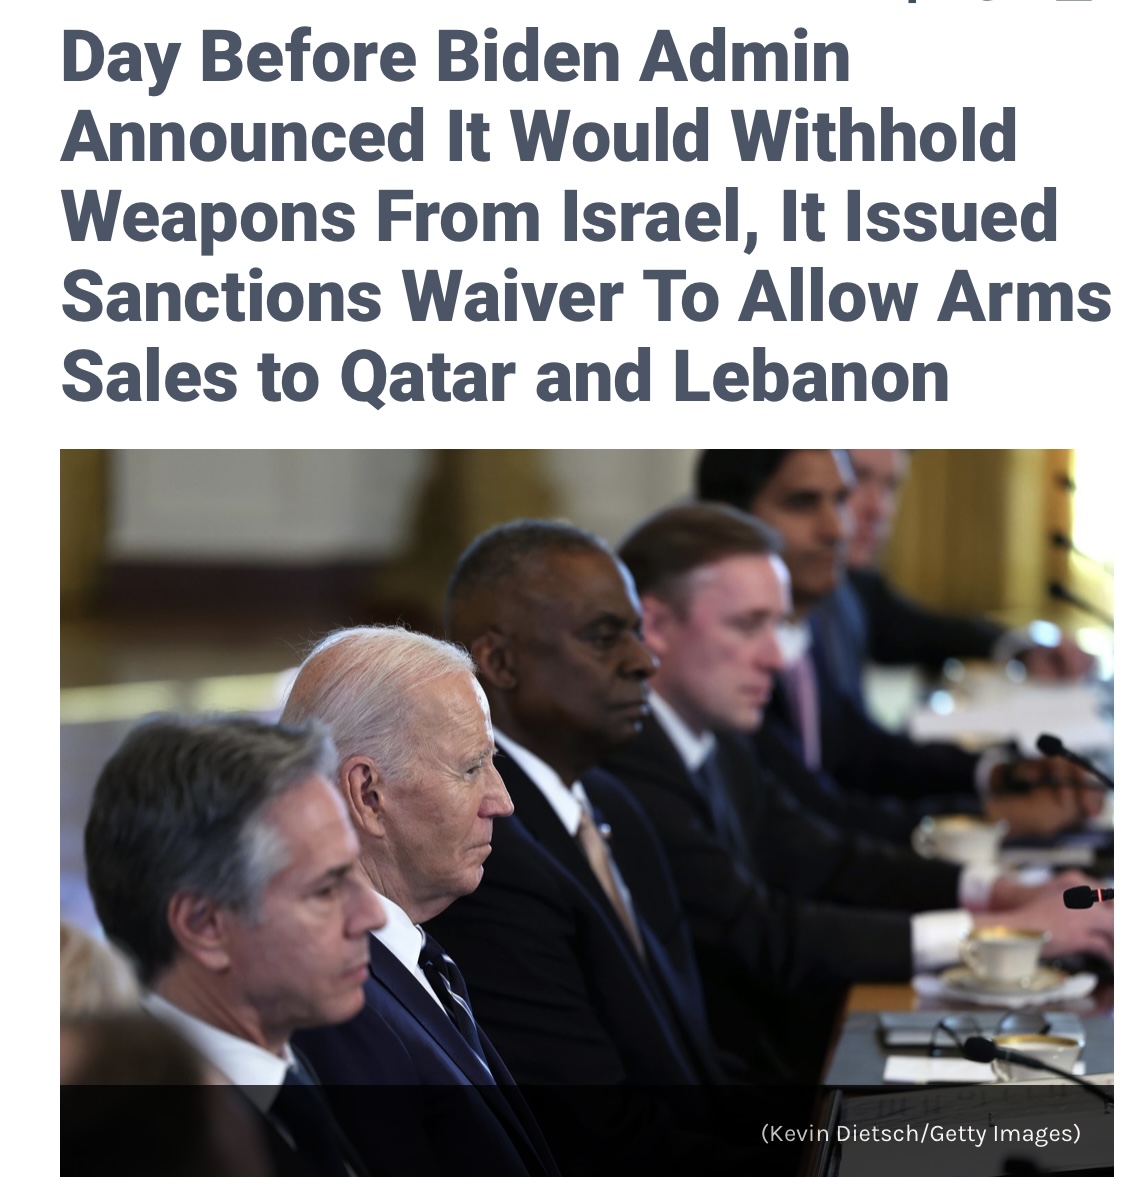 Day before Biden admin announced an arms embargo on Israel it lifted the arms embargo on Arab countries boycotting Israel and associated with IRGC, Hezbollah, Hamas. The rationale for bypassing anti-boycott laws was “US national interest”. What‘s next?